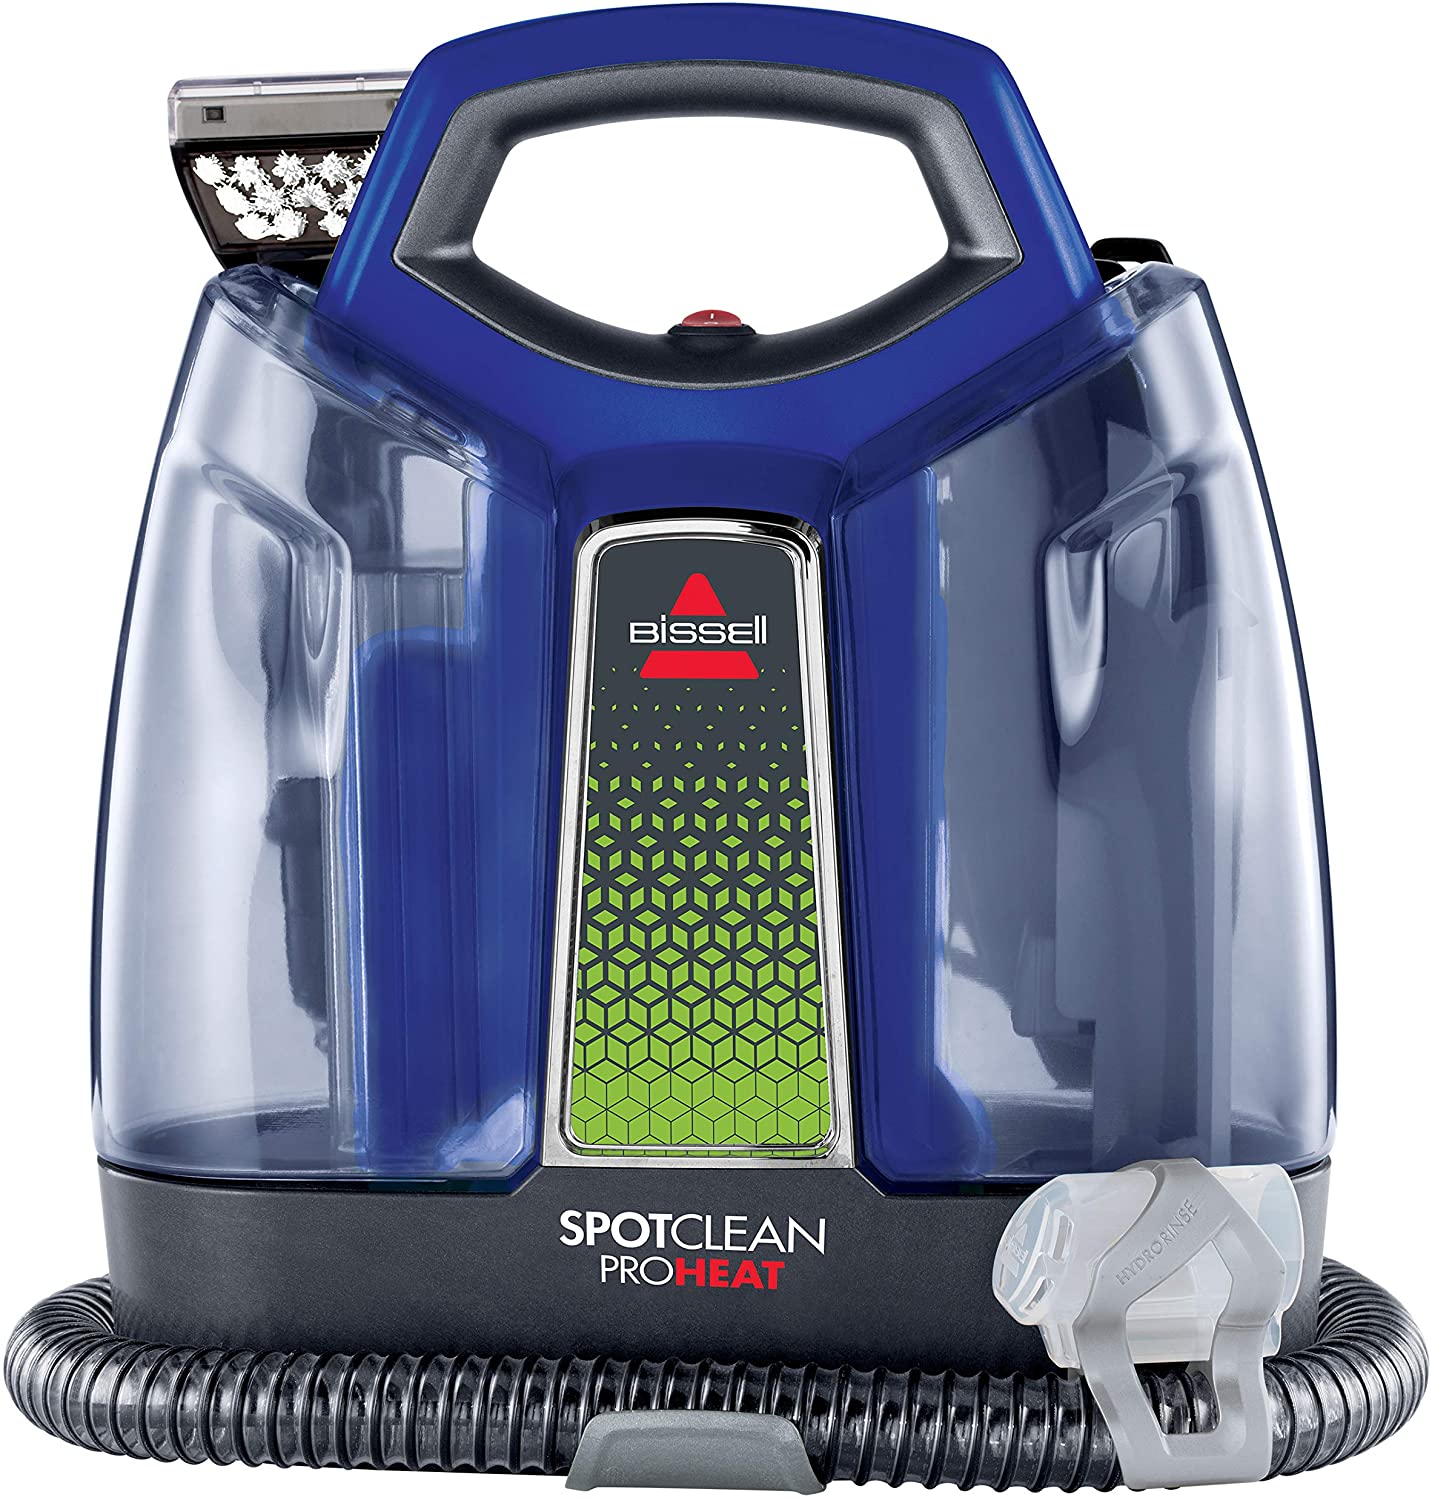 Bissell Portable Cleaner.